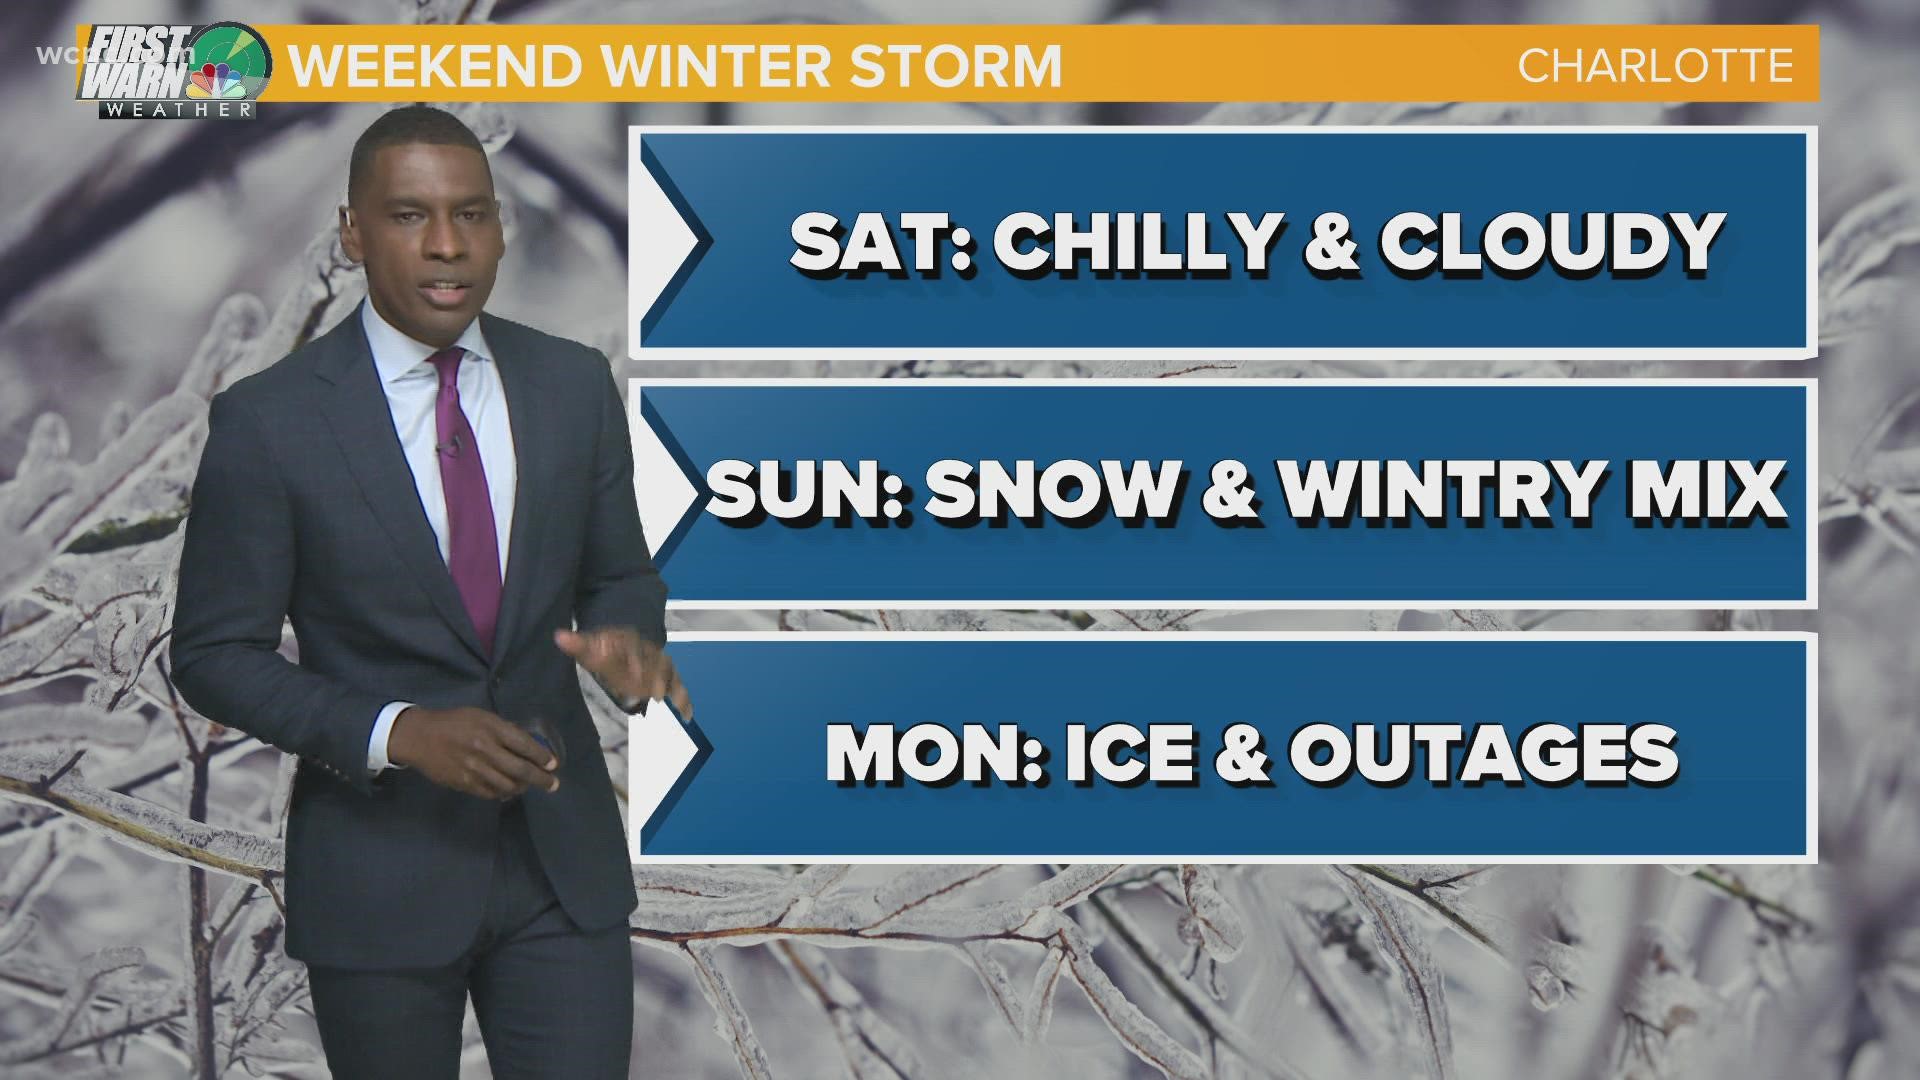 The biggest winter storm since December 2018 will bring a wintry mix of freezing rain, ice, sleet, and snow to the Charlotte region Saturday night throughout Sunday.